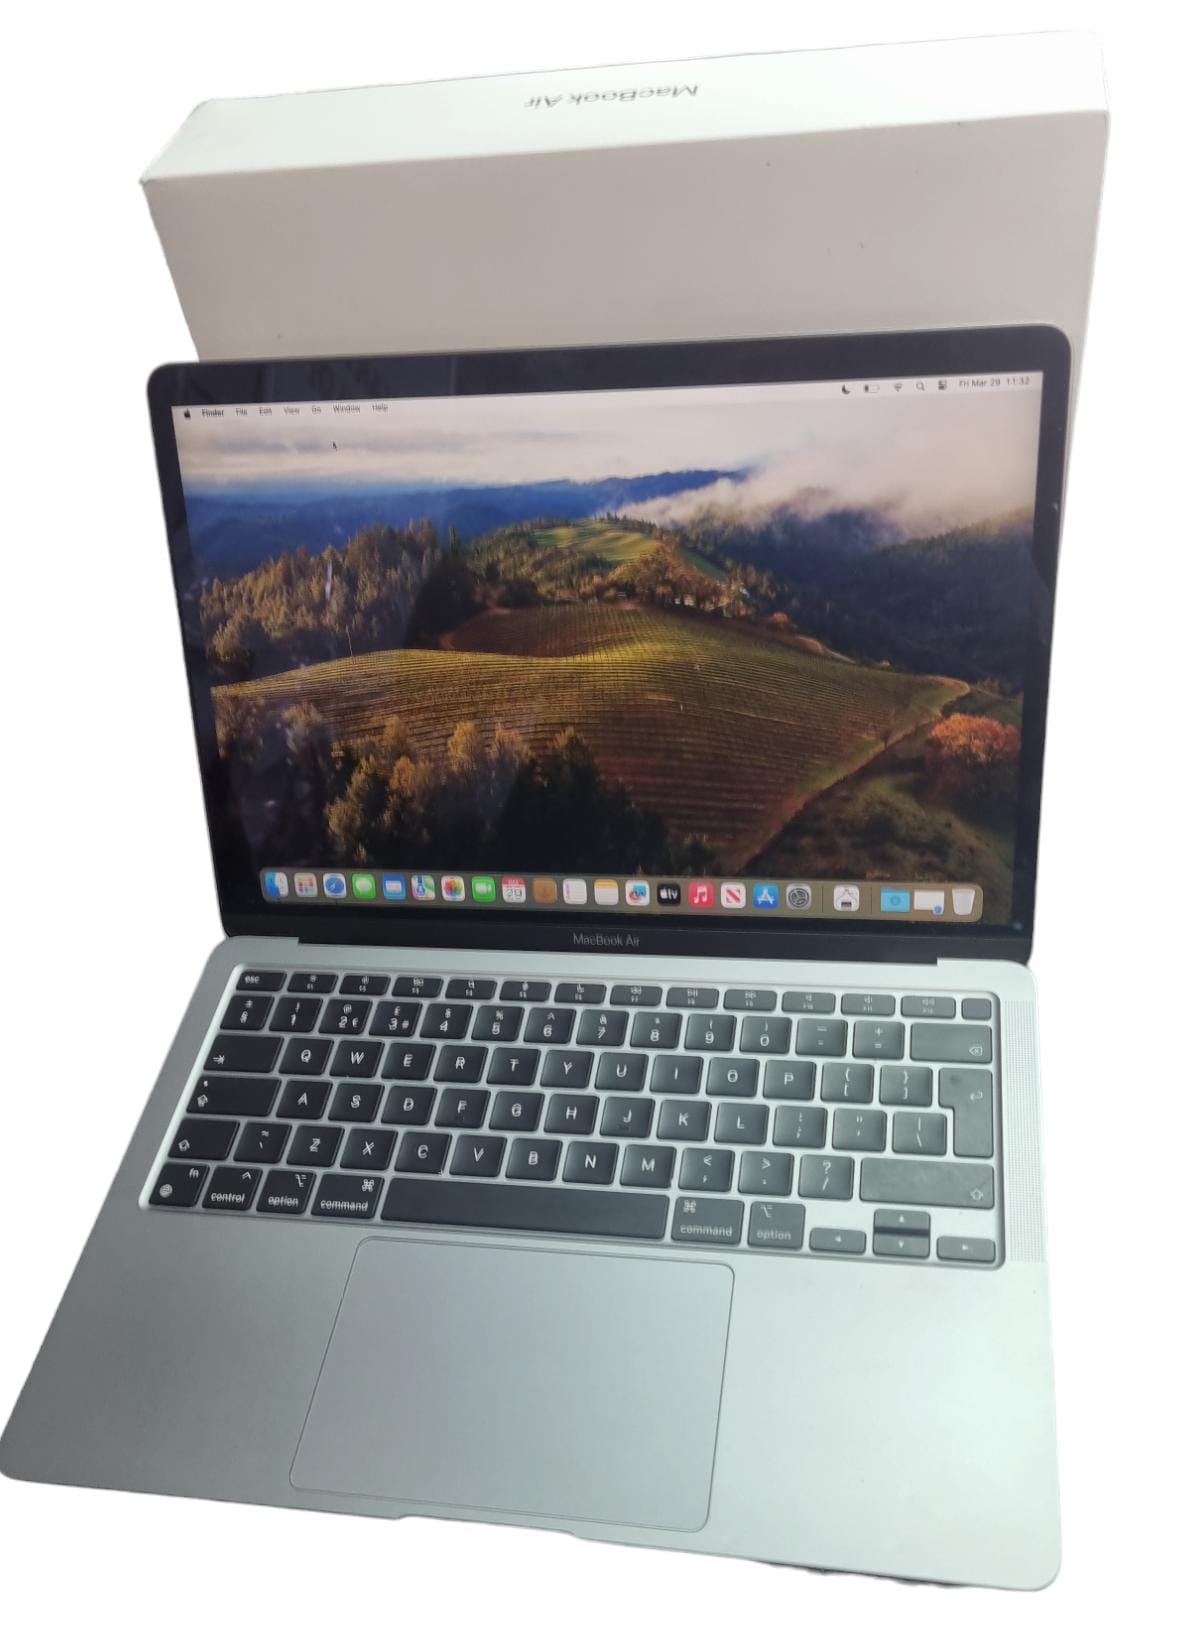 Apple MacBook Air (M1, 2020) - 8GB Unified Memory - 256GB SSD - 13.3 -Inch - A2337 - Boxed